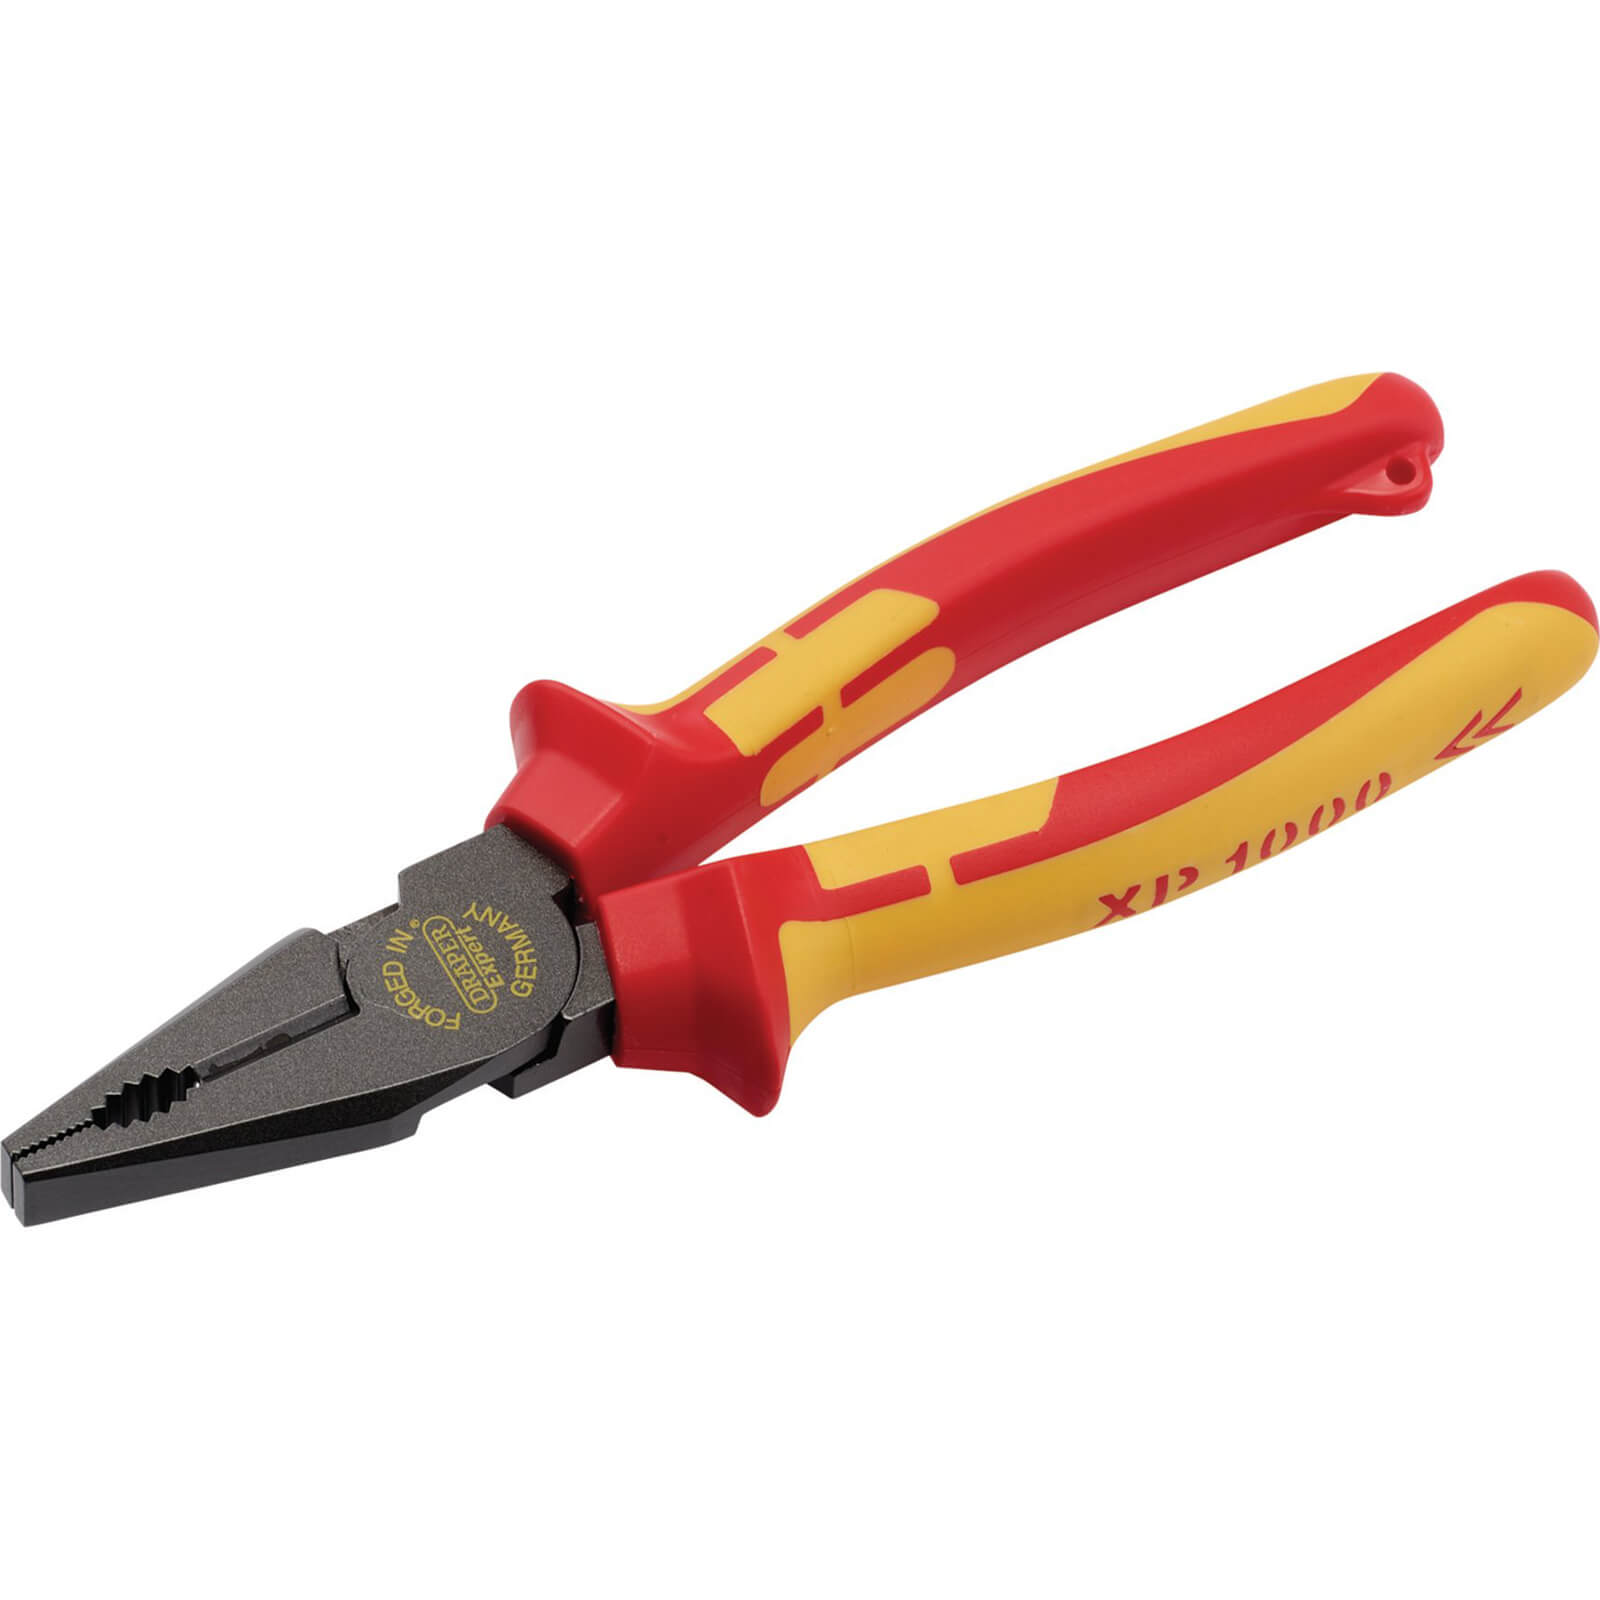 Draper XP1000 VDE Tethered High Leverage Combination Pliers 200mm